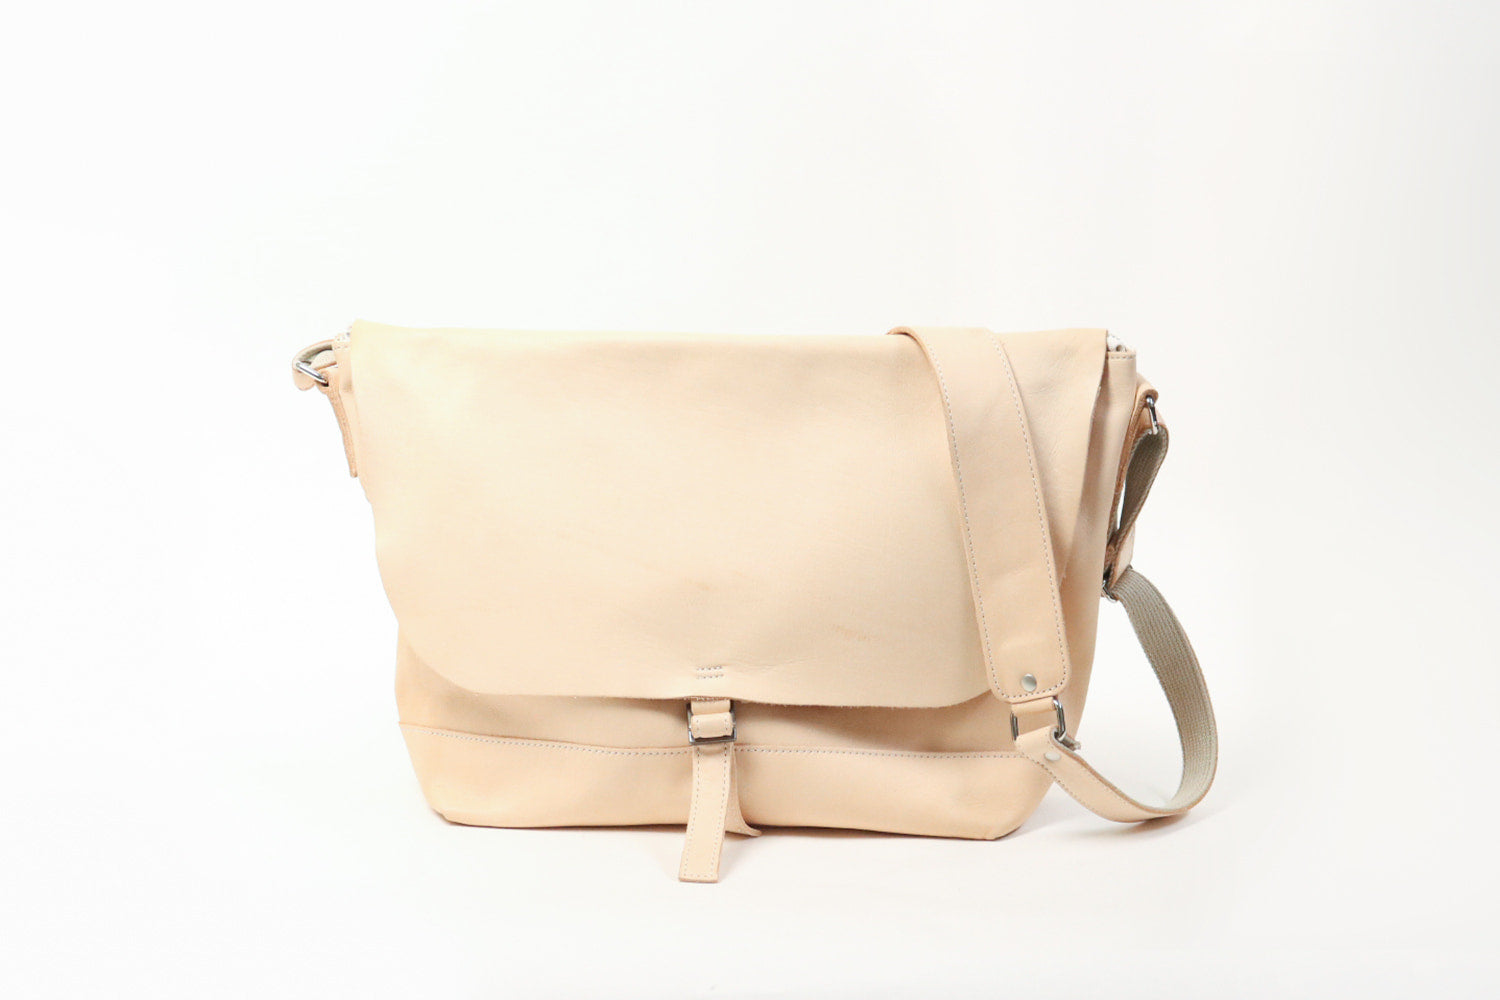 REALMIND FORO Natural Let's grow it into a candy color. Rare horse-grown tanned shoulder bag